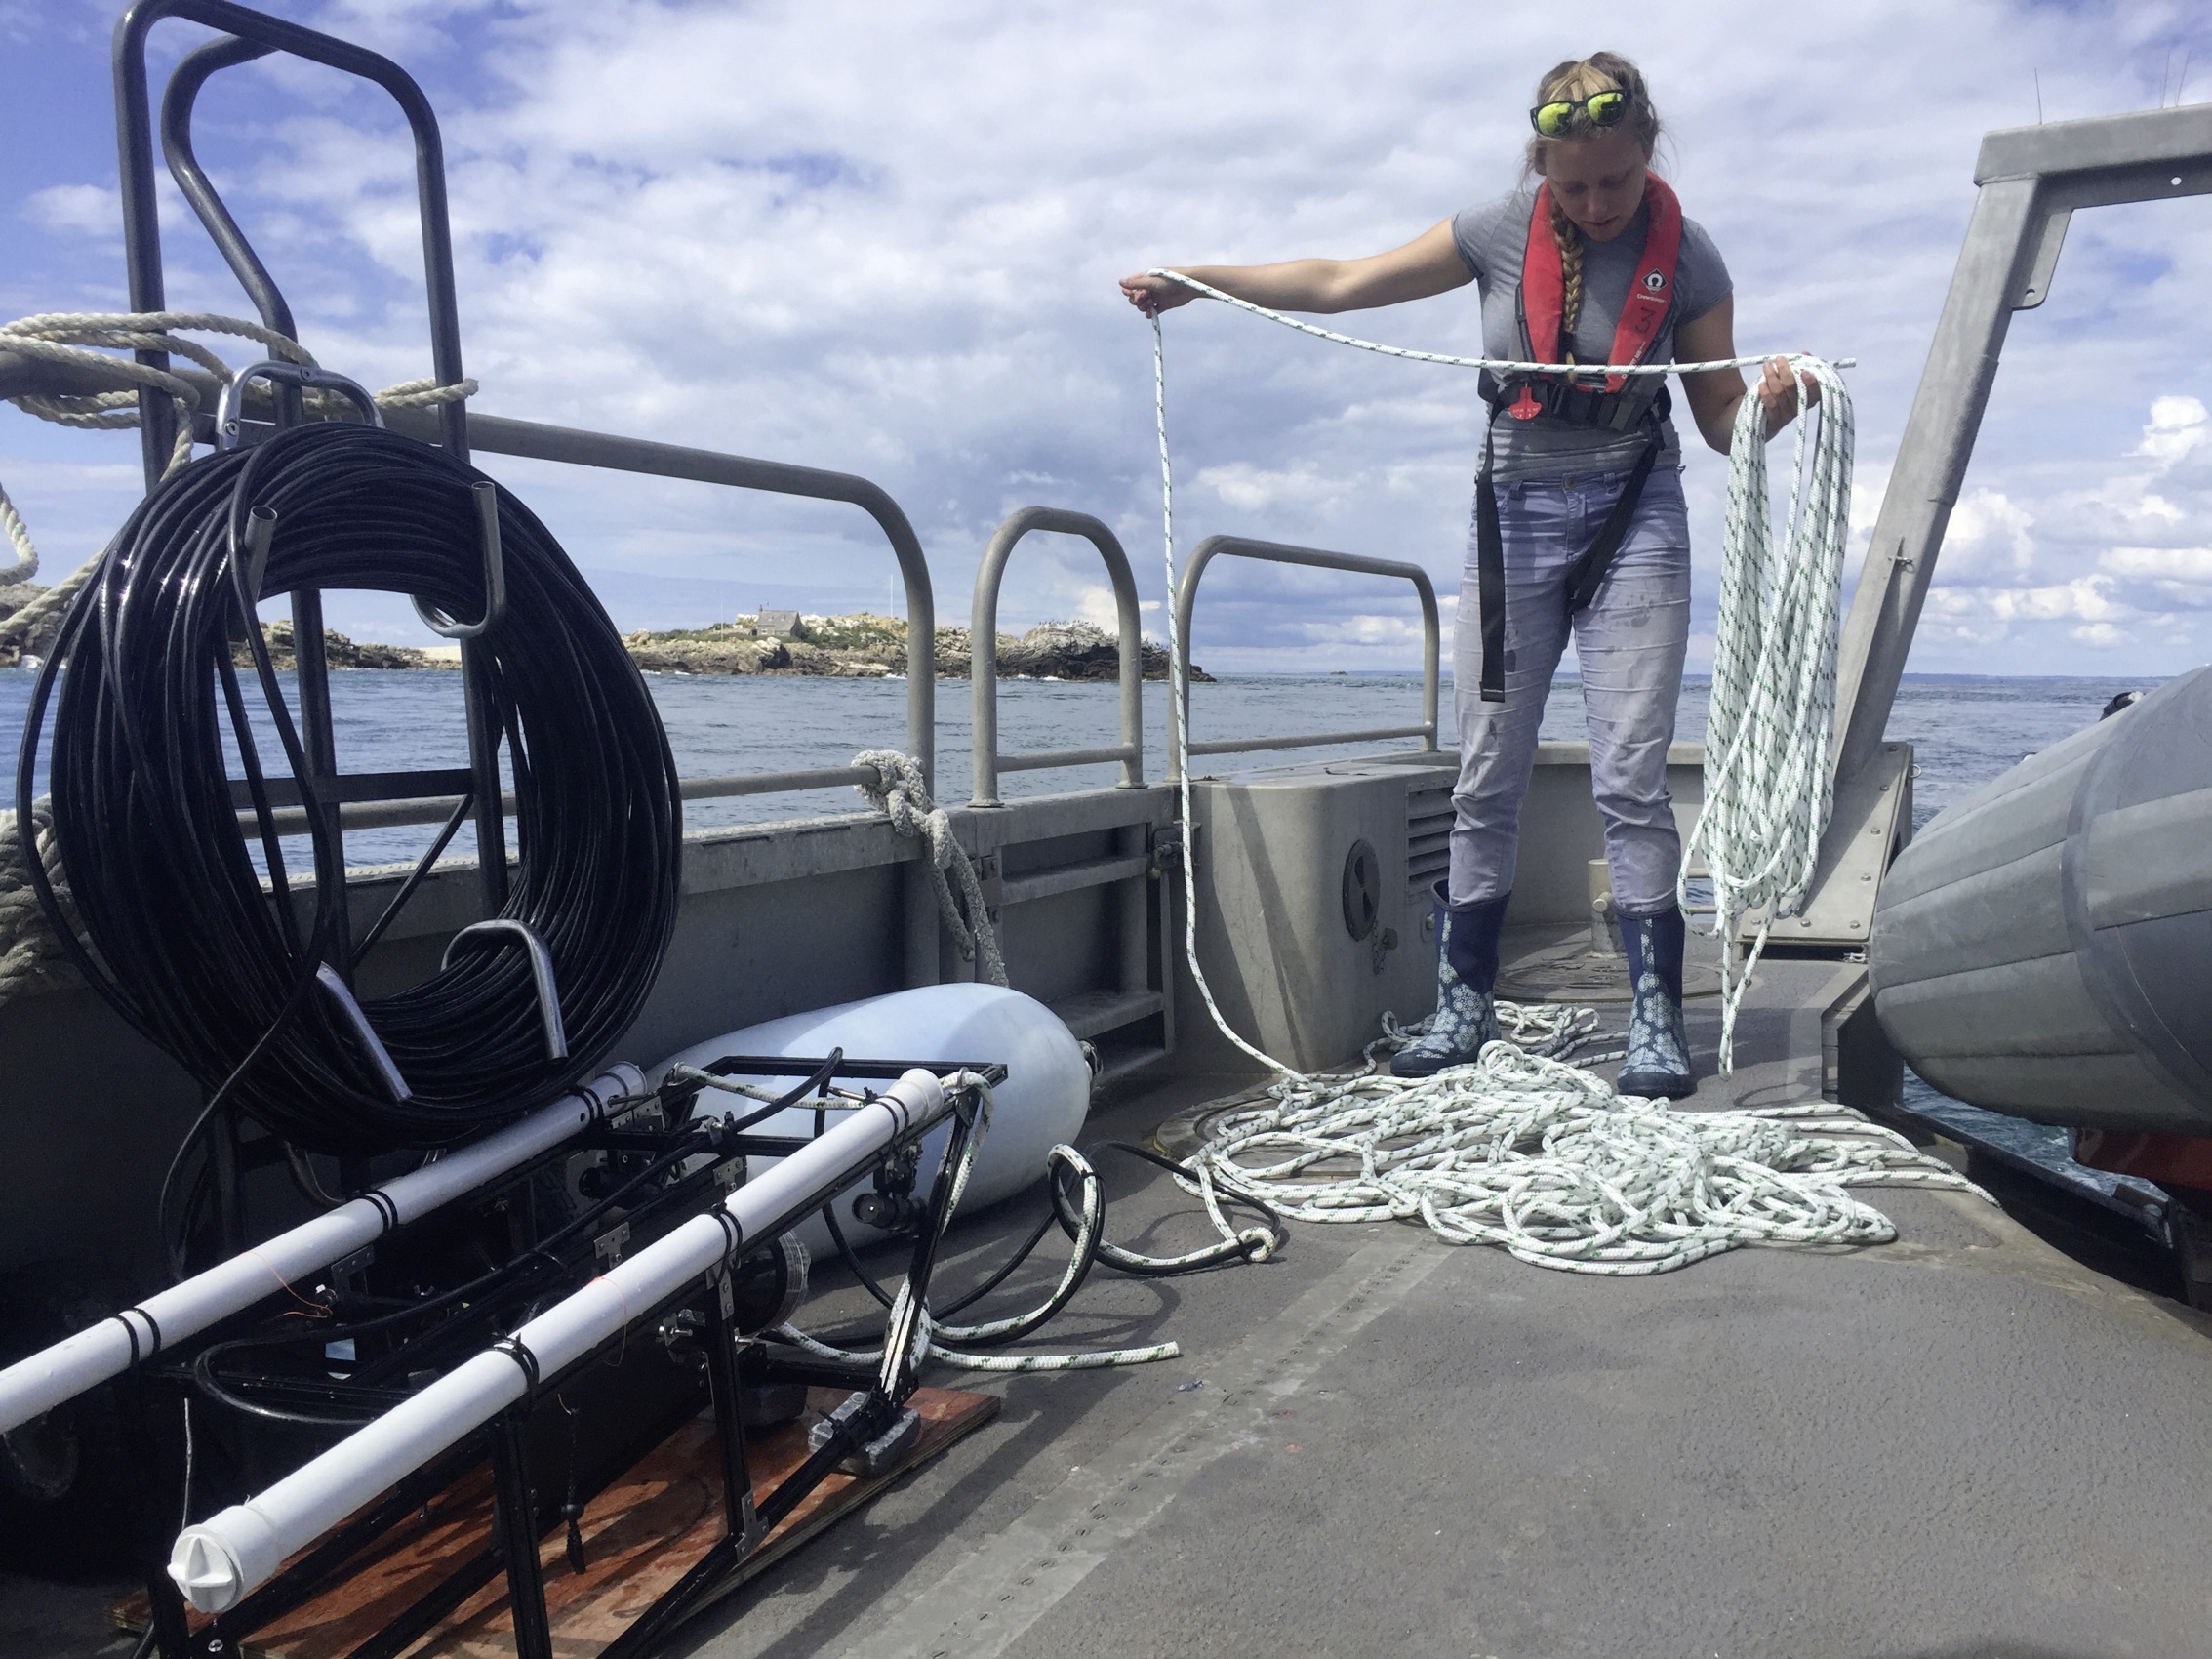 Sam Blampied with camera equipment (left) that is dragged behind the boat (25767862)